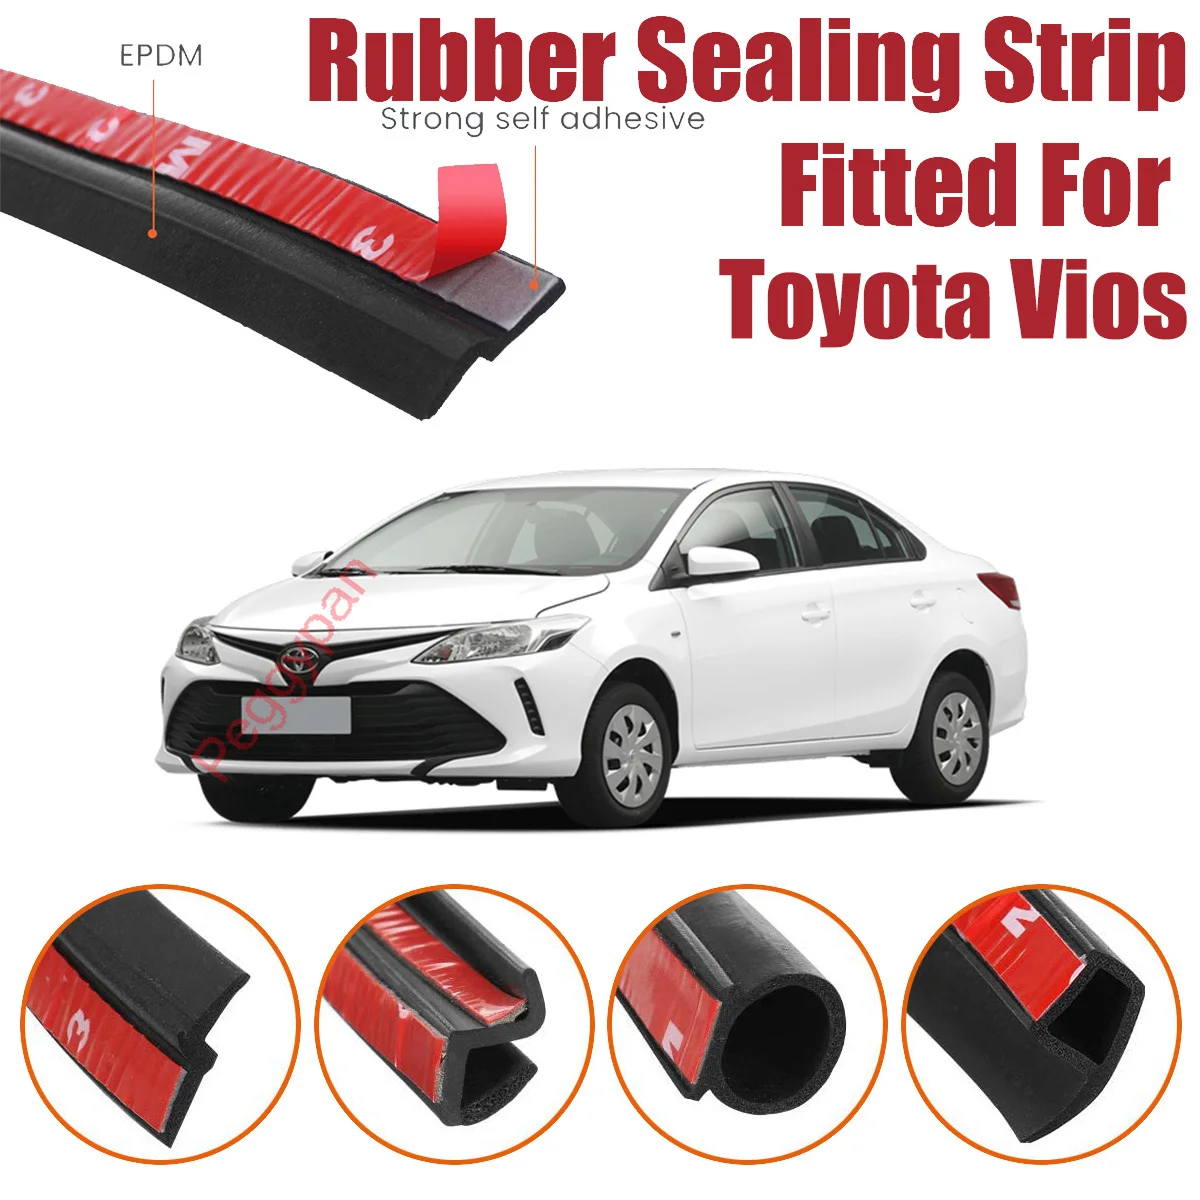 Door Seal Strip Kit Self Adhesive Window Engine Cover Soundproof Rubber Weather Draft Wind Noise Reduction For Toyota Vios